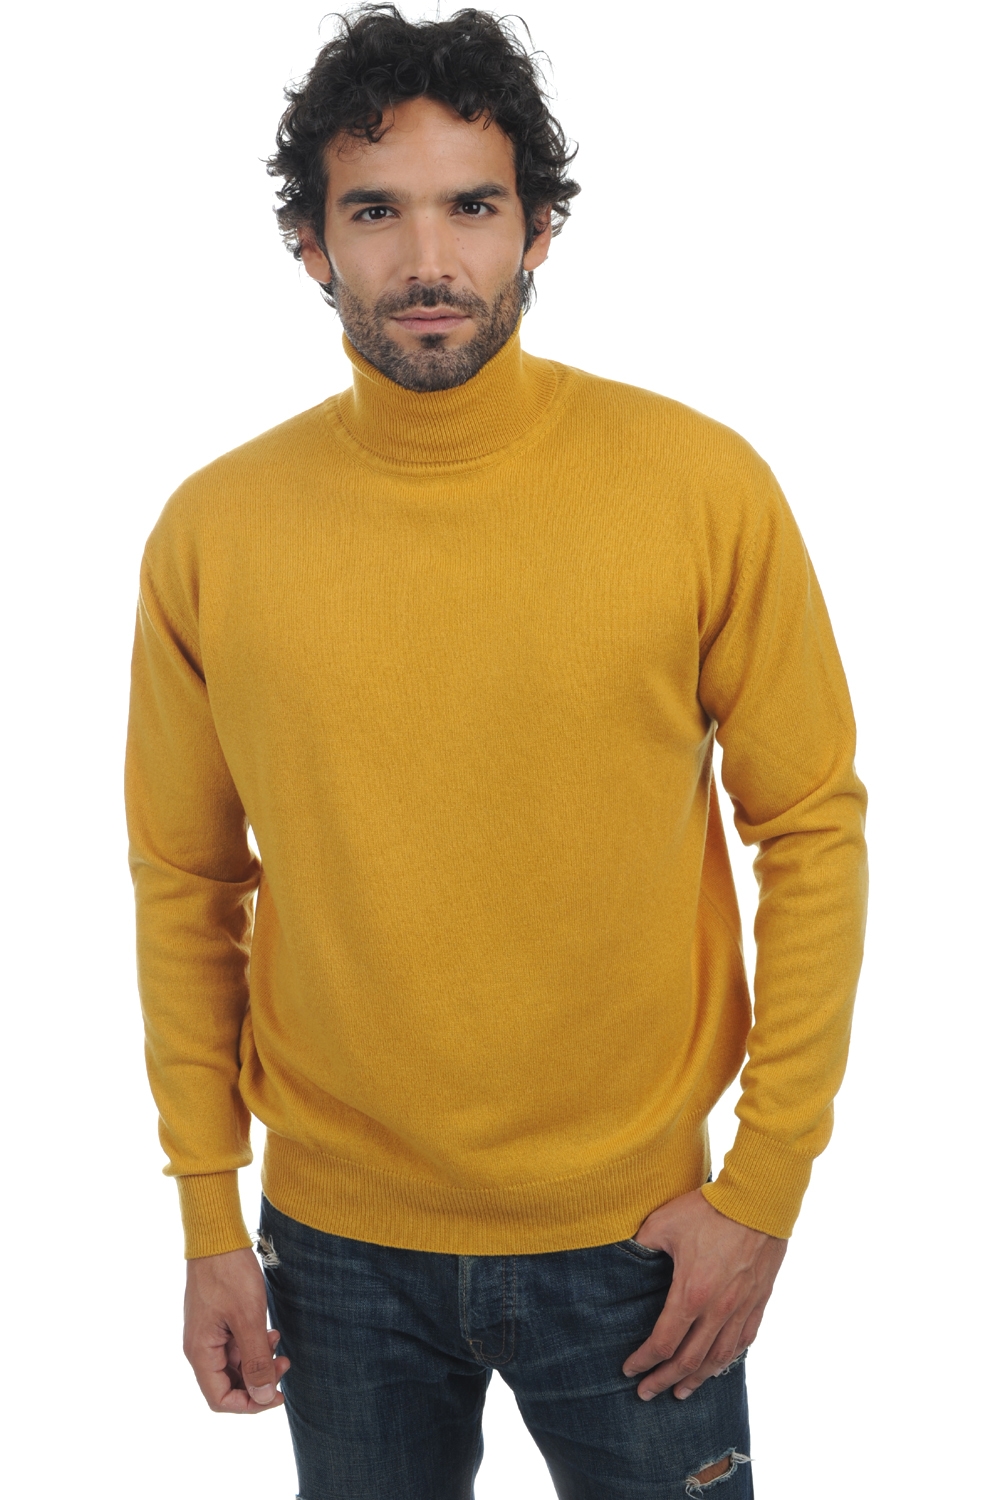 Cachemire pull homme edgar moutarde 2xl